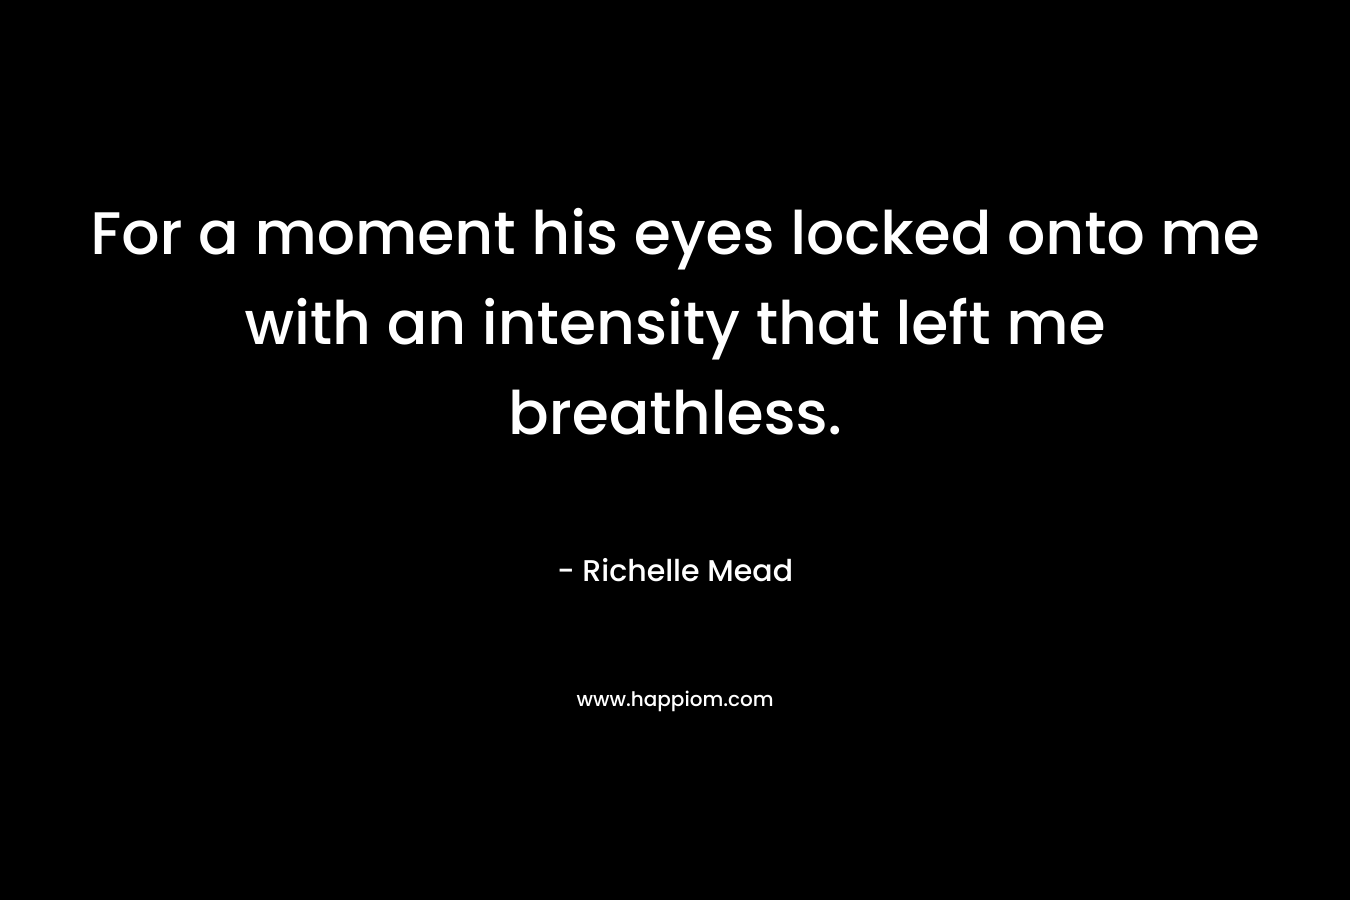 For a moment his eyes locked onto me with an intensity that left me breathless.